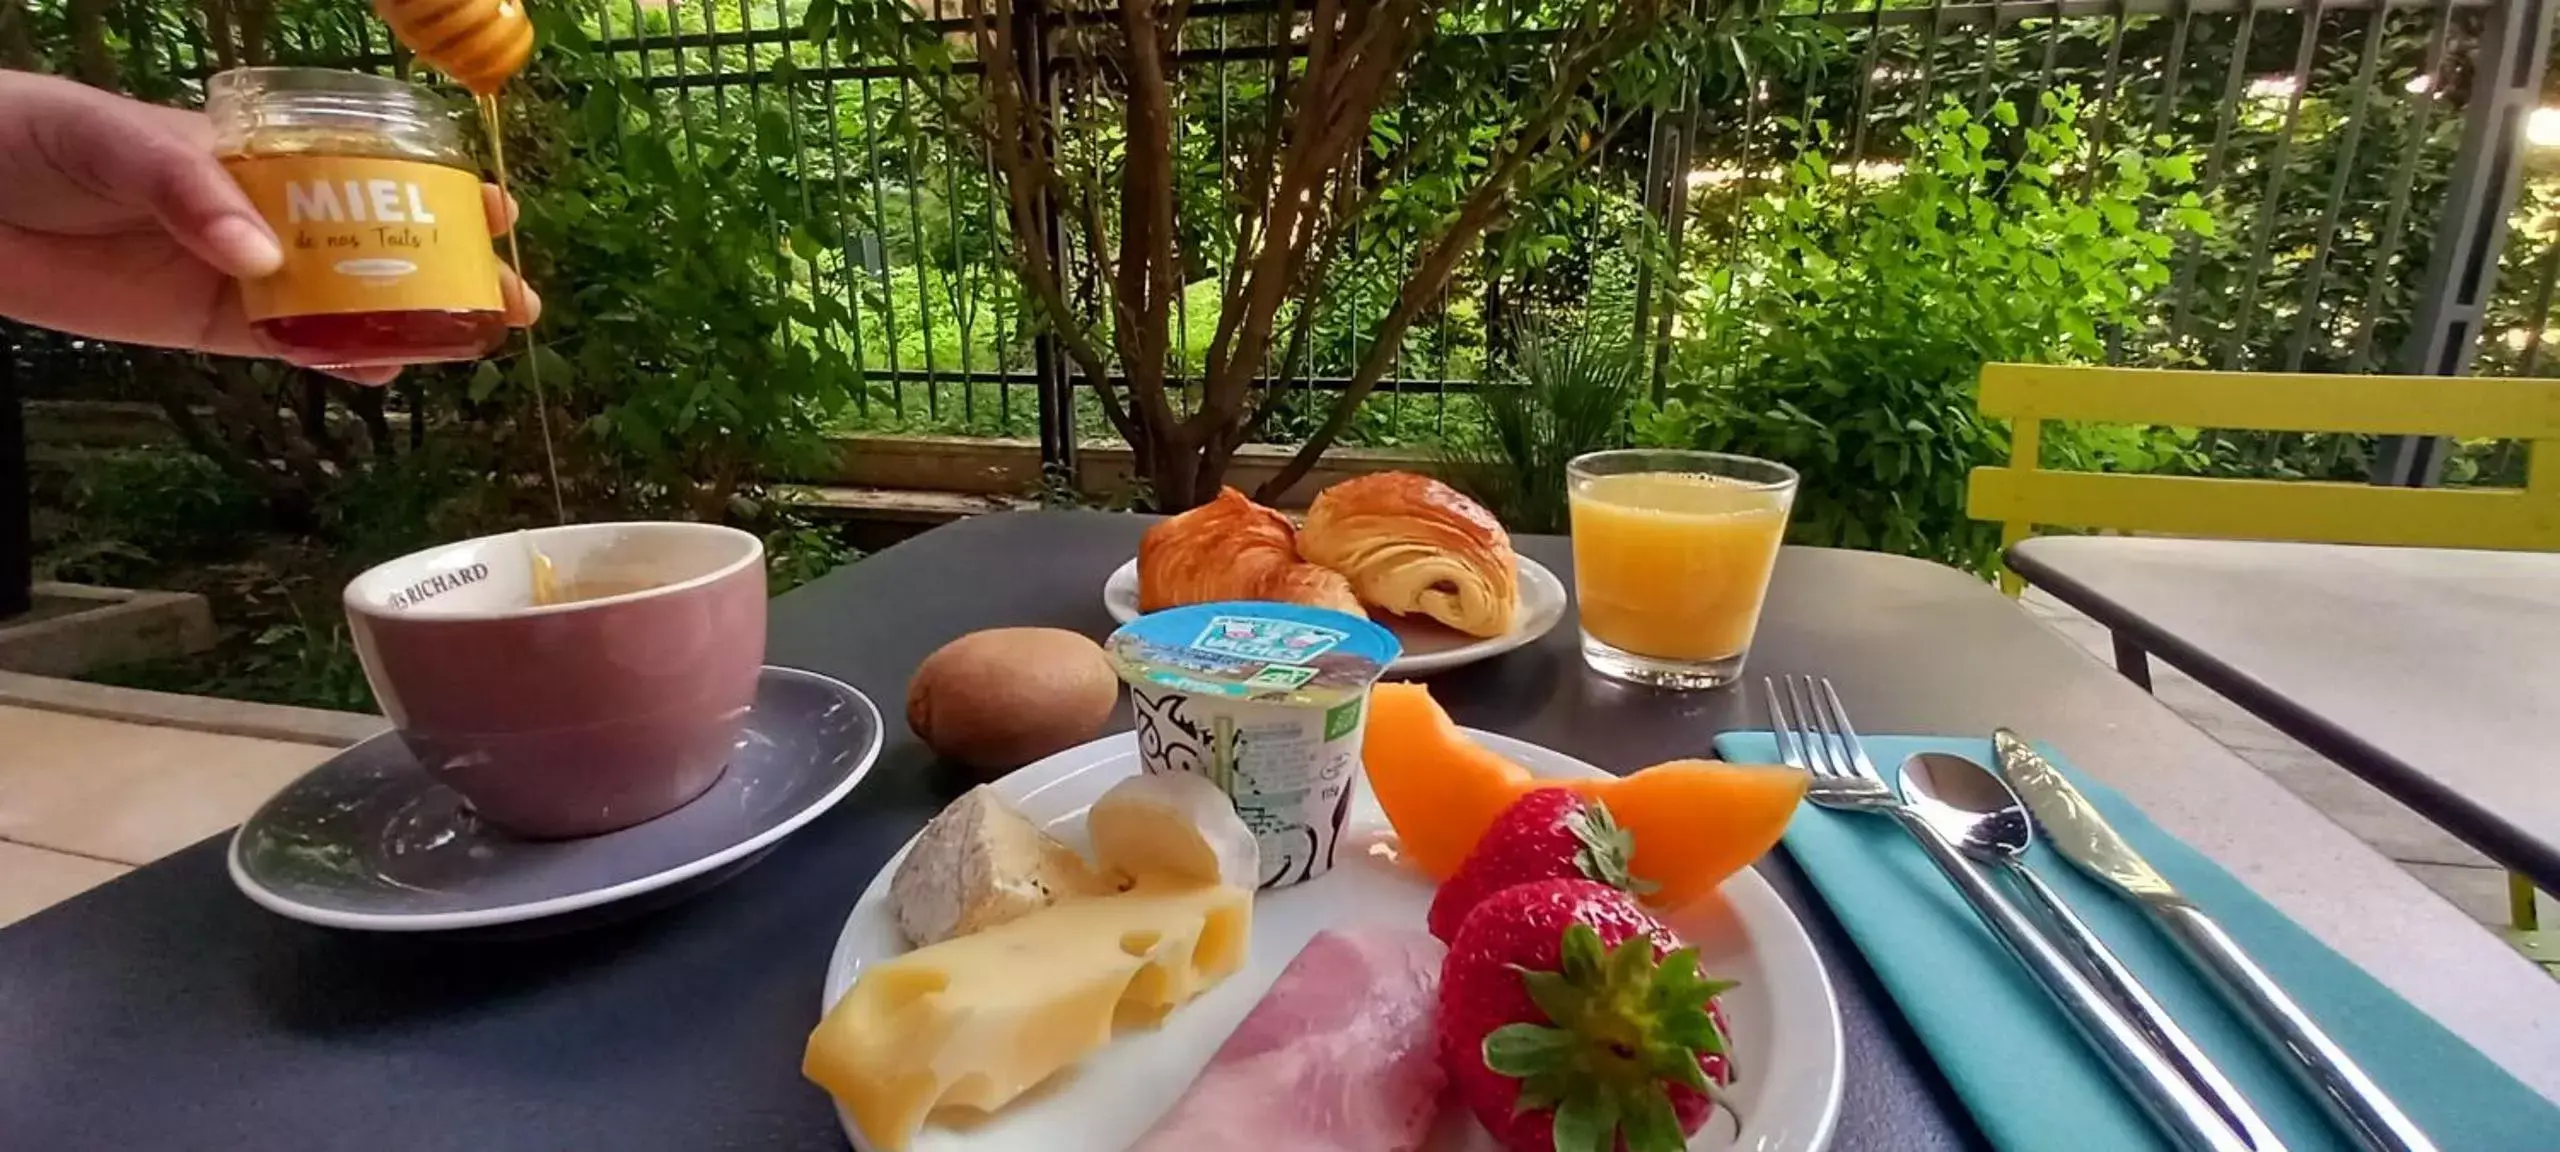 Breakfast in Residhome Bois Colombes Monceau